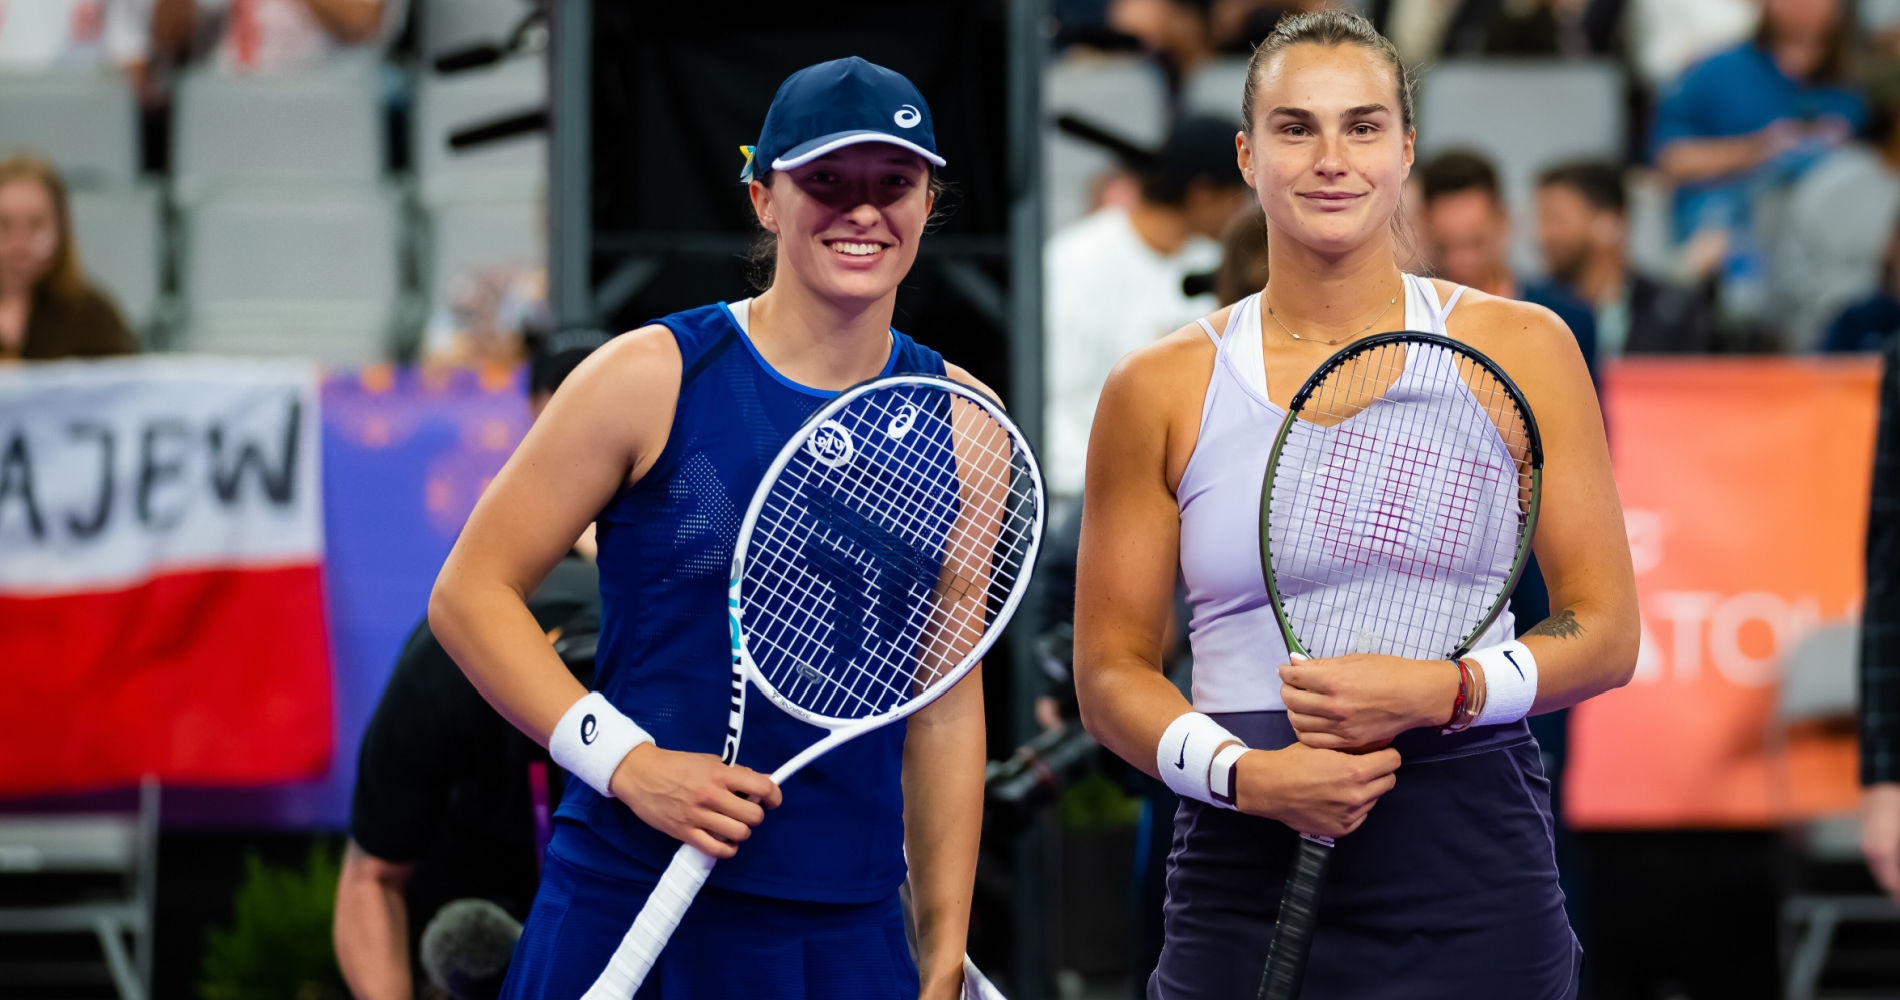 Womens world No 1 ranking on line at US Open